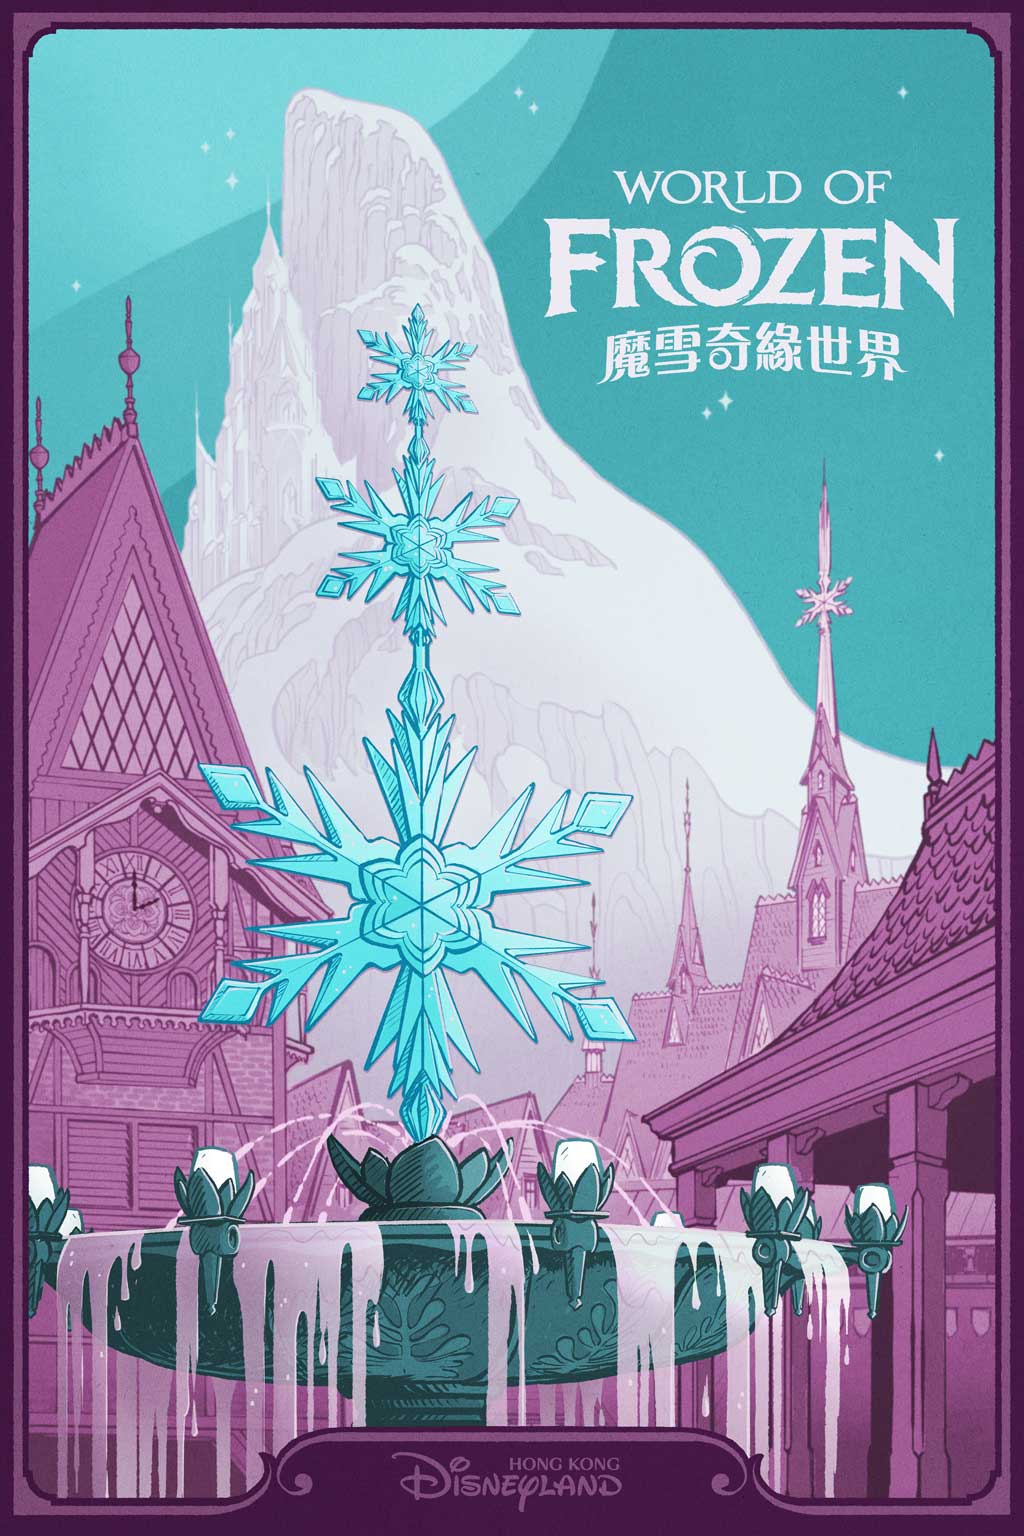 World of Frozen – Land Poster Based on Walt Disney Animation Studios’ “Frozen” and “Frozen 2,” World of Frozen will open at Hong Kong Disneyland in the second half of 2023. Guests visiting World of Frozen will be immersed in new attractions, dining and shopping experiences as they stroll through the kingdom of Arendelle.